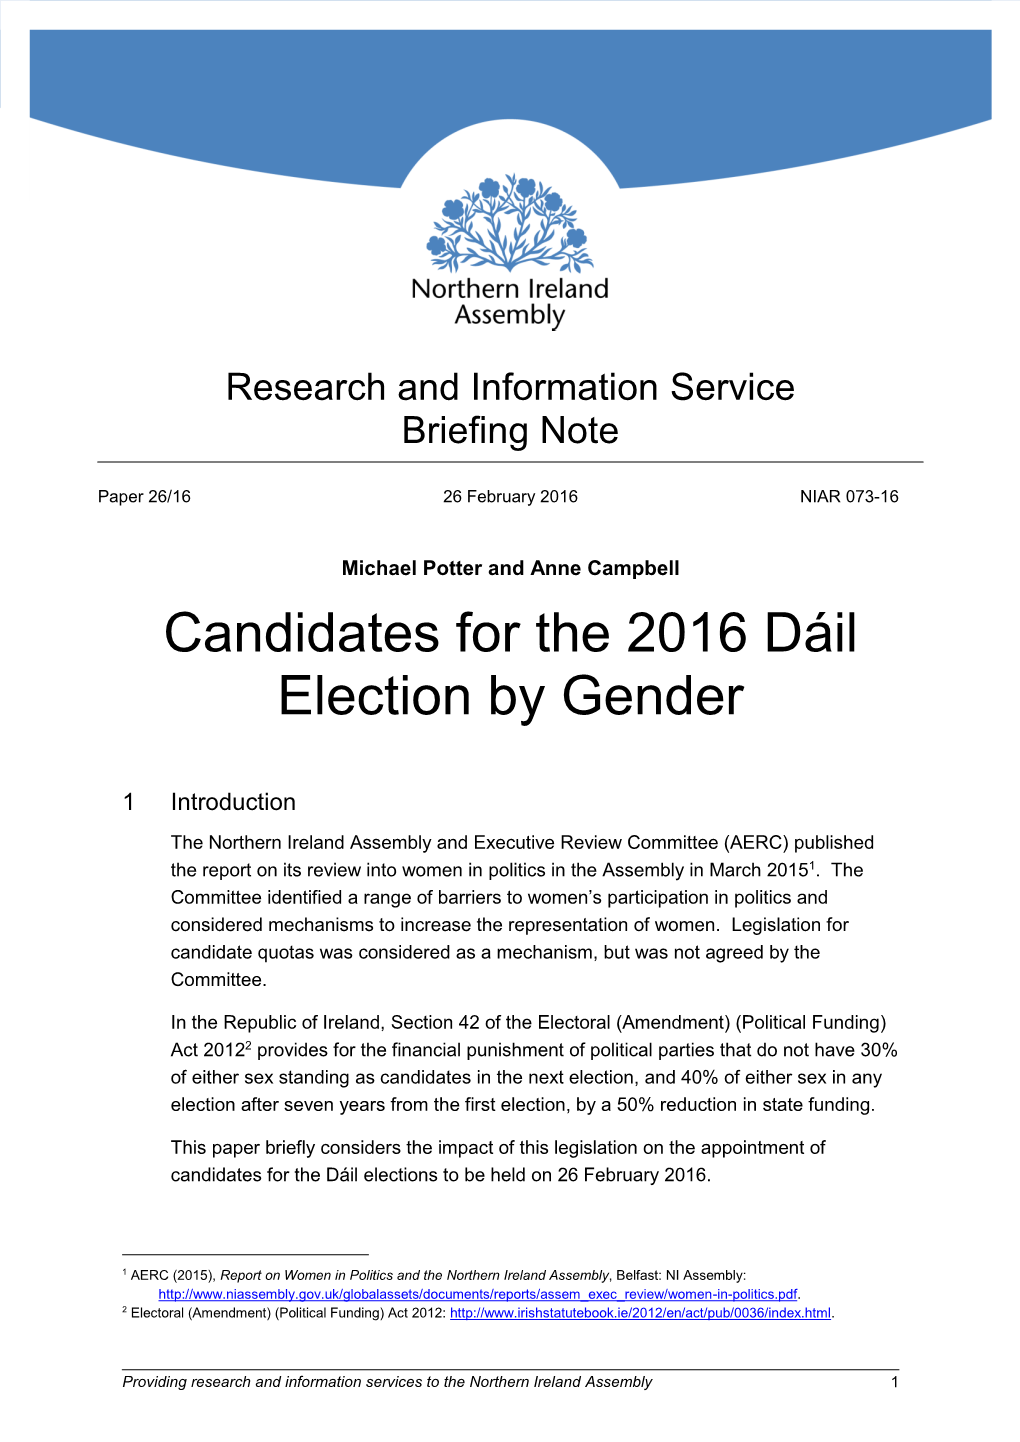 Candidates for the 2016 Dáil Election by Gender